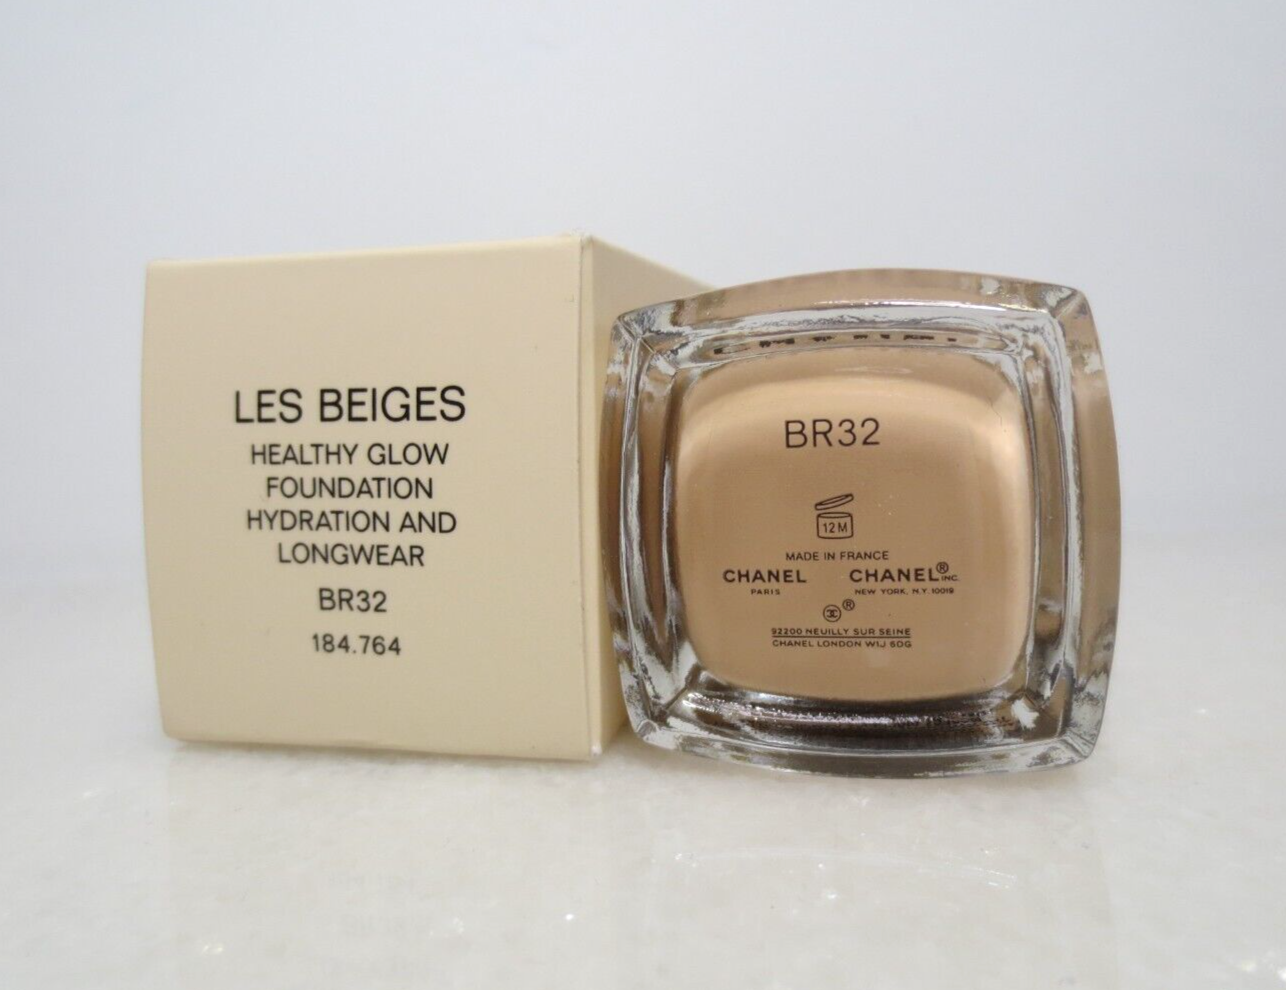 CHANEL neutral (LES BEIGES) Healthy Glow Foundation Hydration and